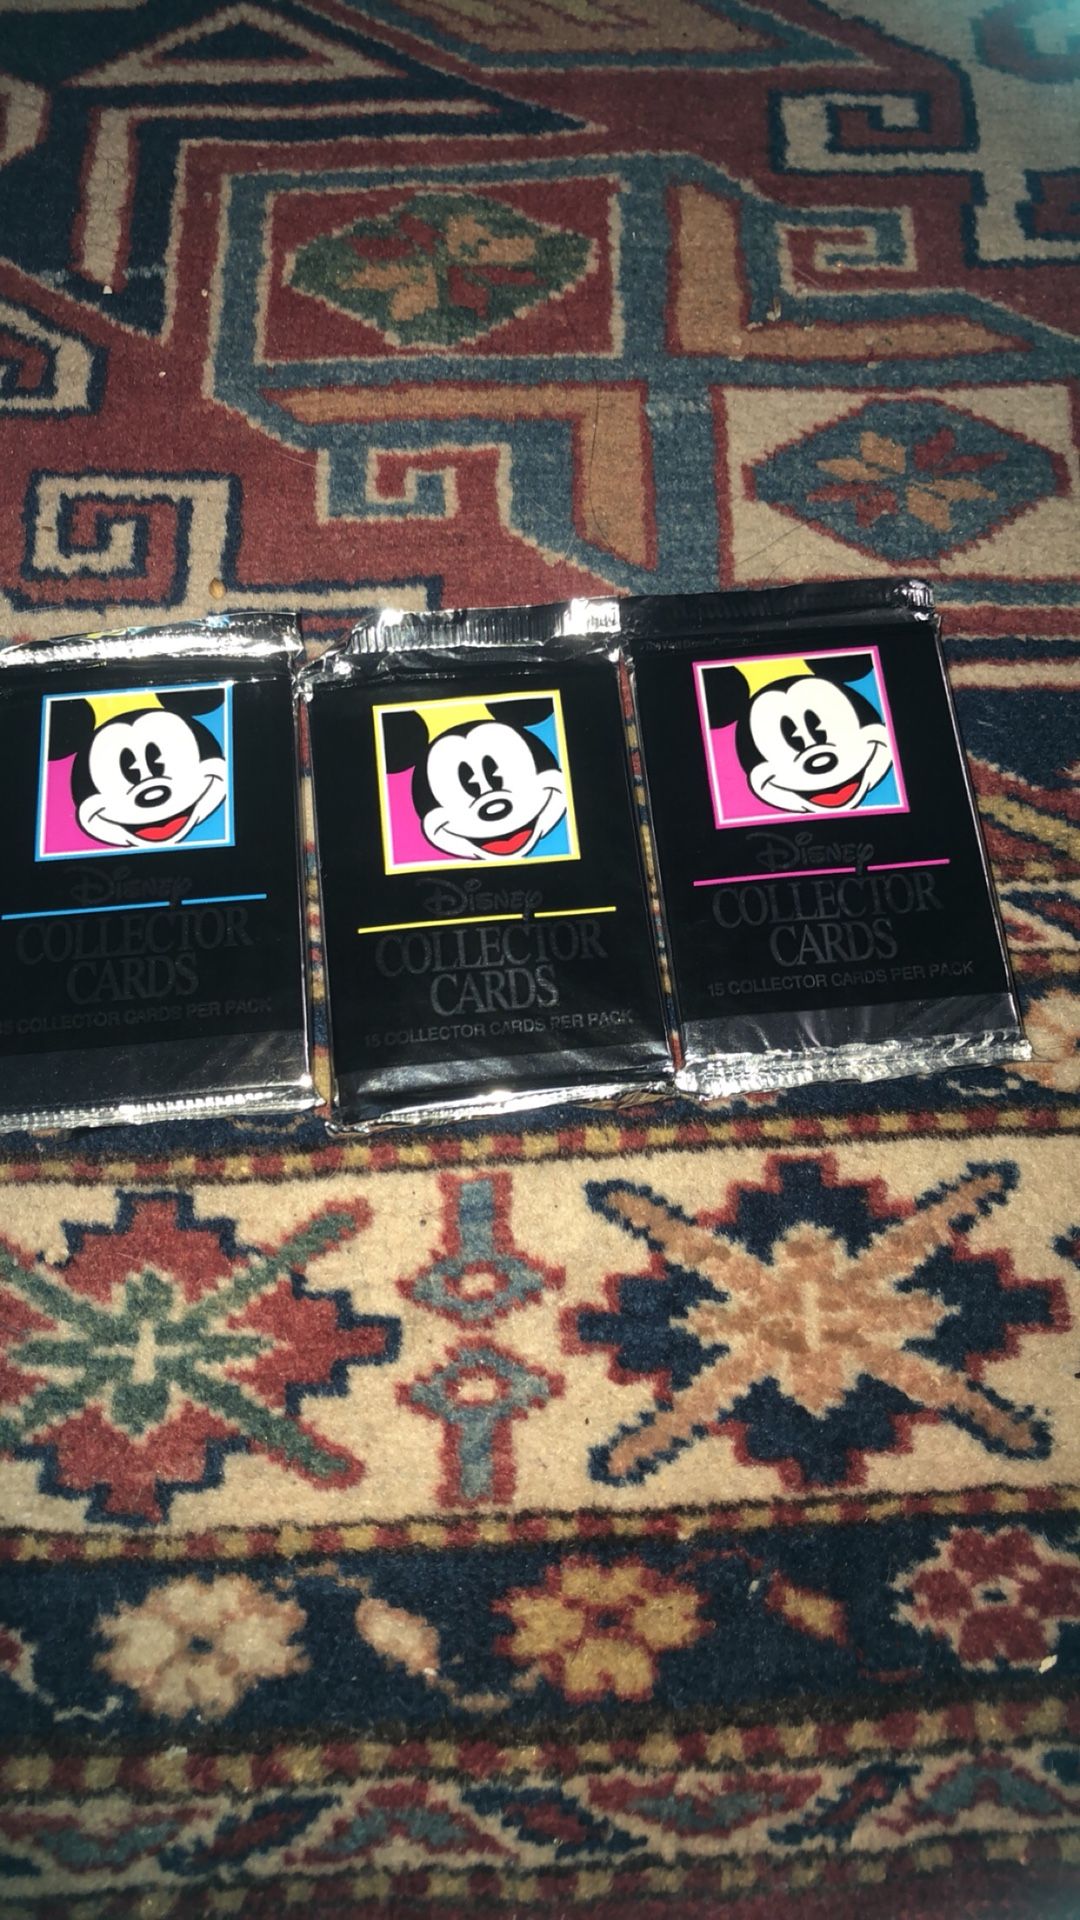 1991 Disney collector cards 15 cards in a pack